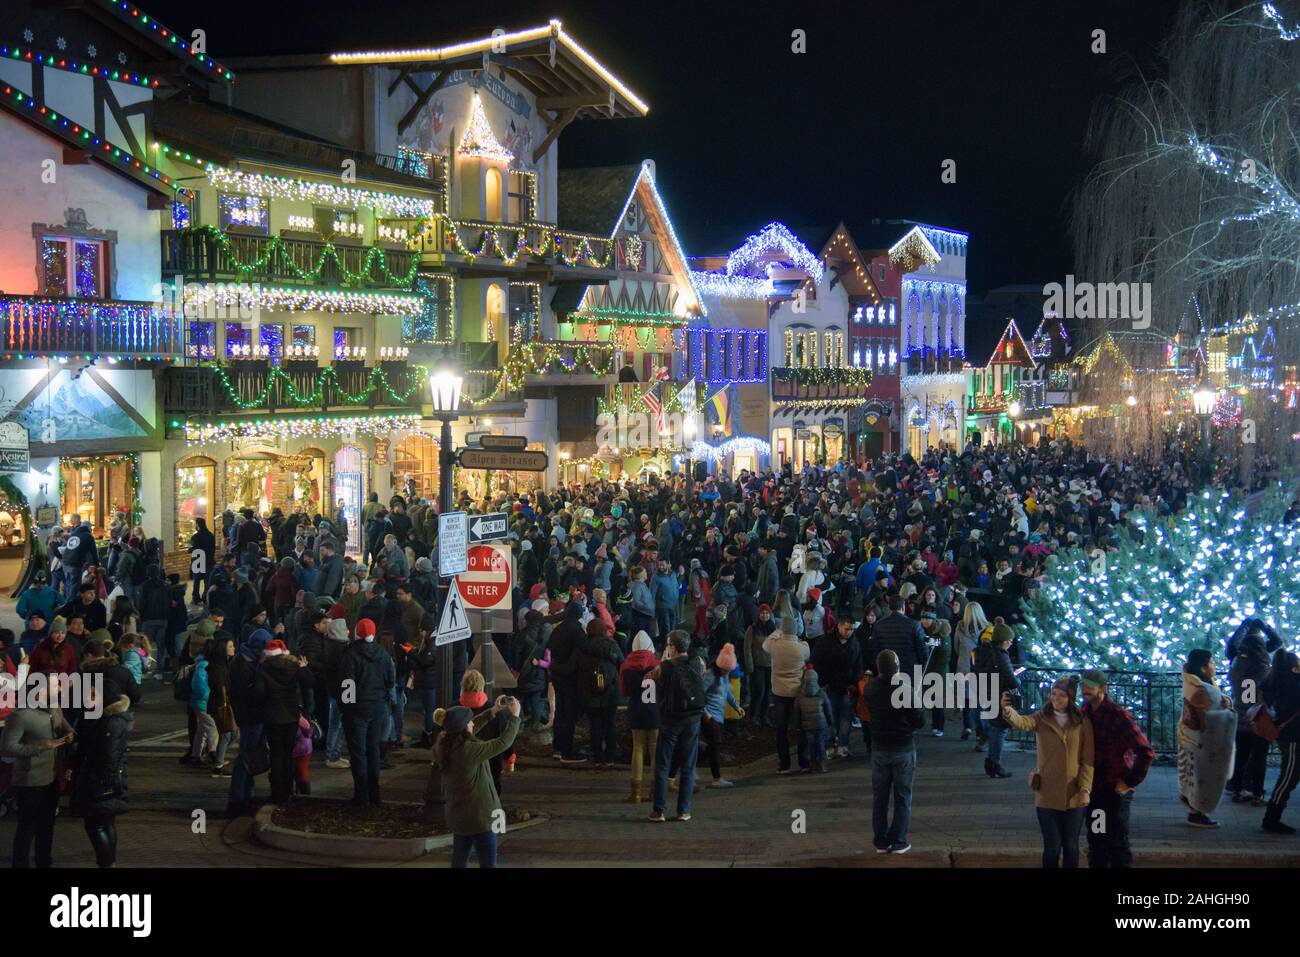 Crowds flock to the Christmas Lighting Festival in Leavenworth, WA--a faux-Bavarian town in the Cascade Mountains and a popular day trip from Seattle. Stock Photo